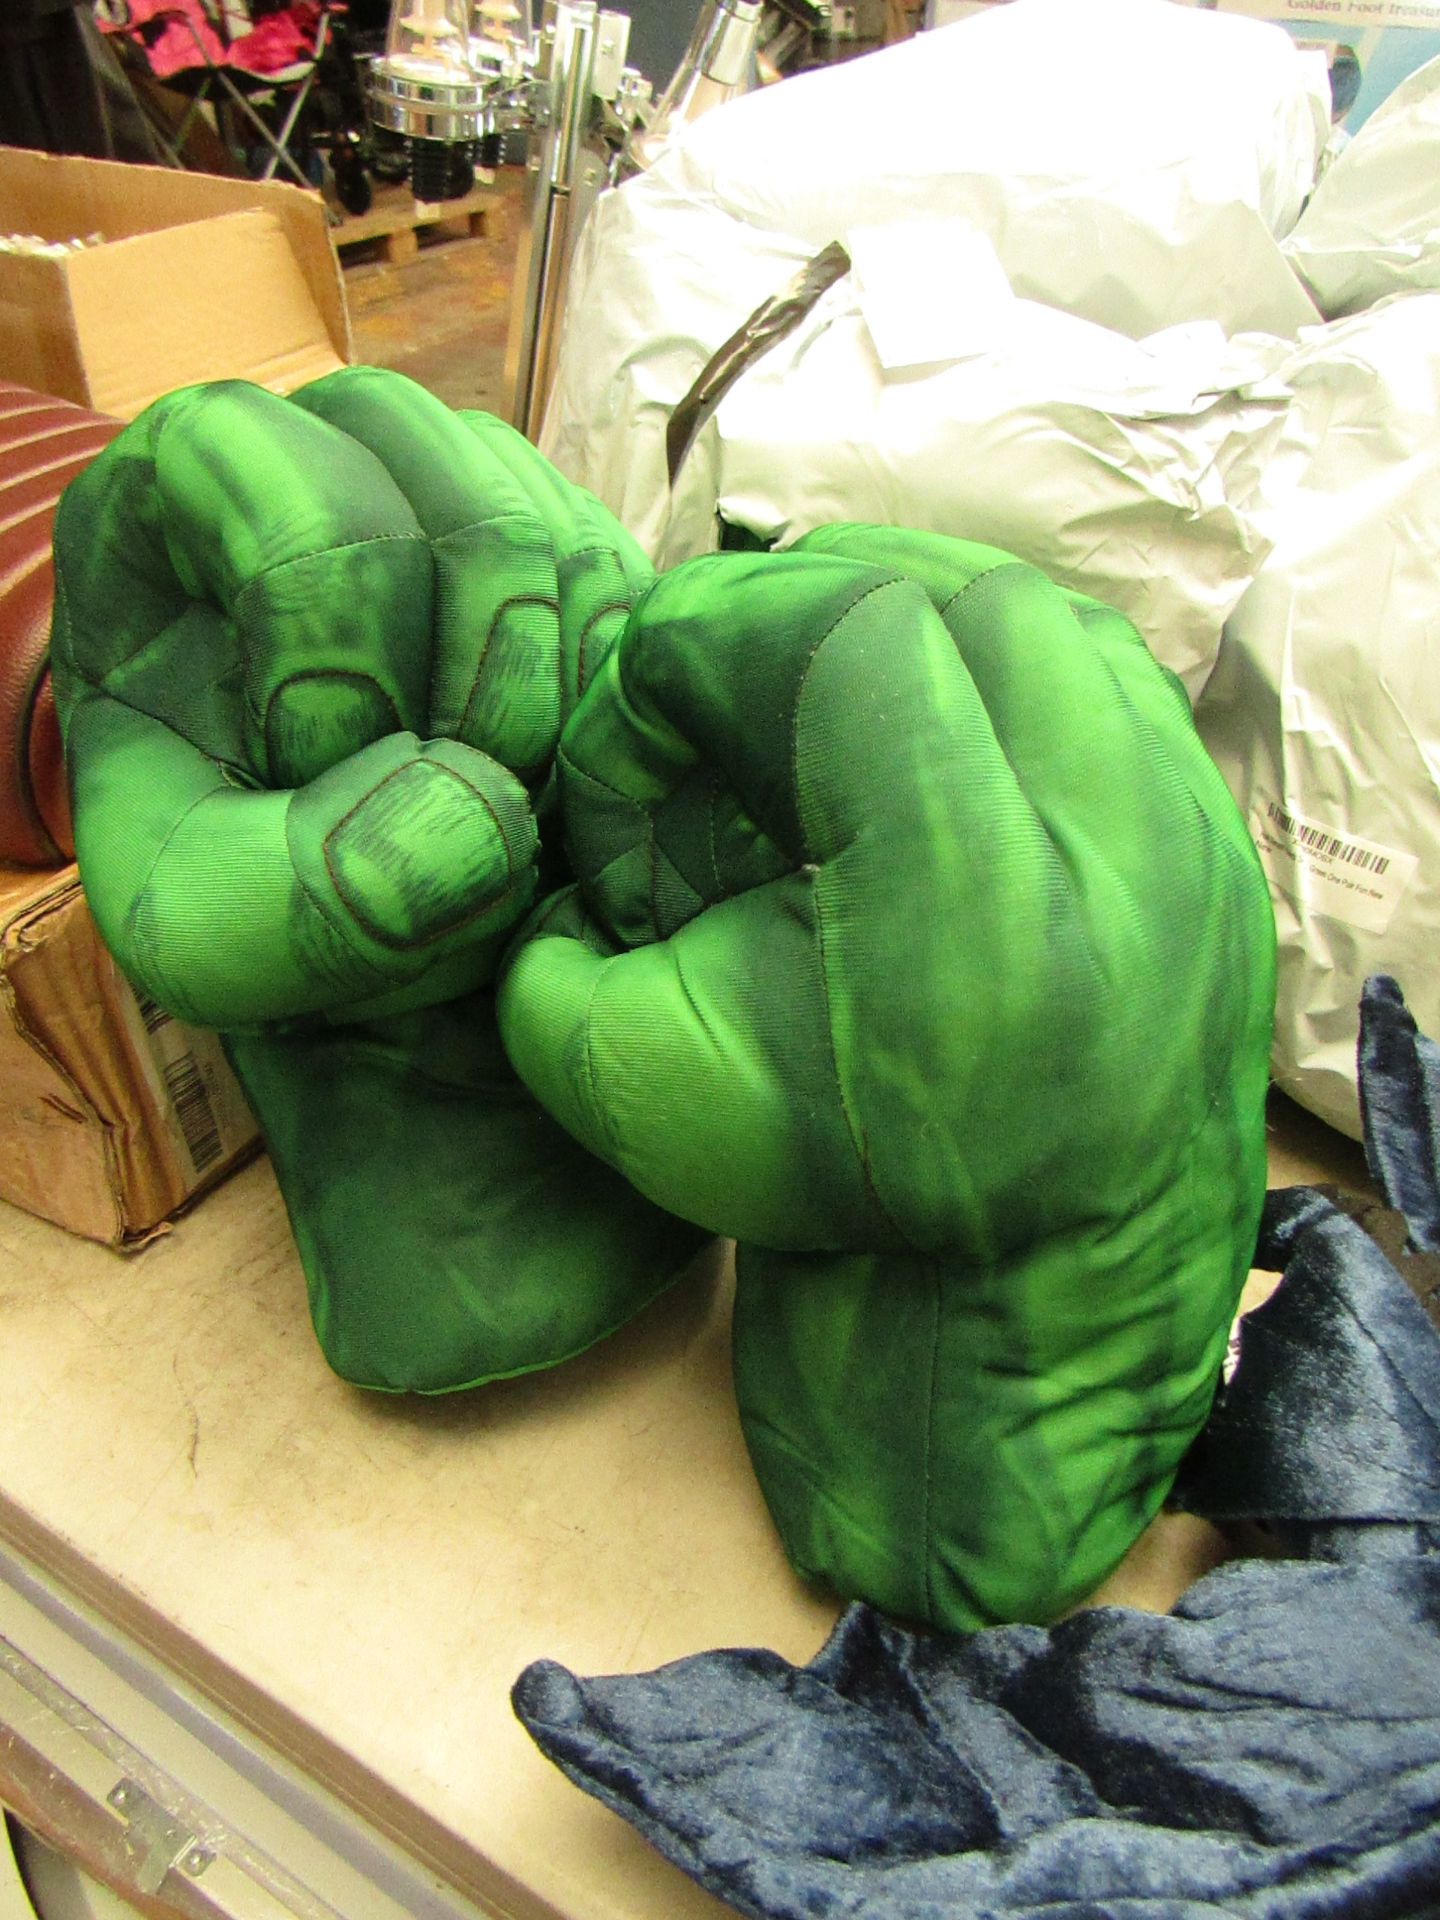 Green Hulk padded gloves, new and packaged.